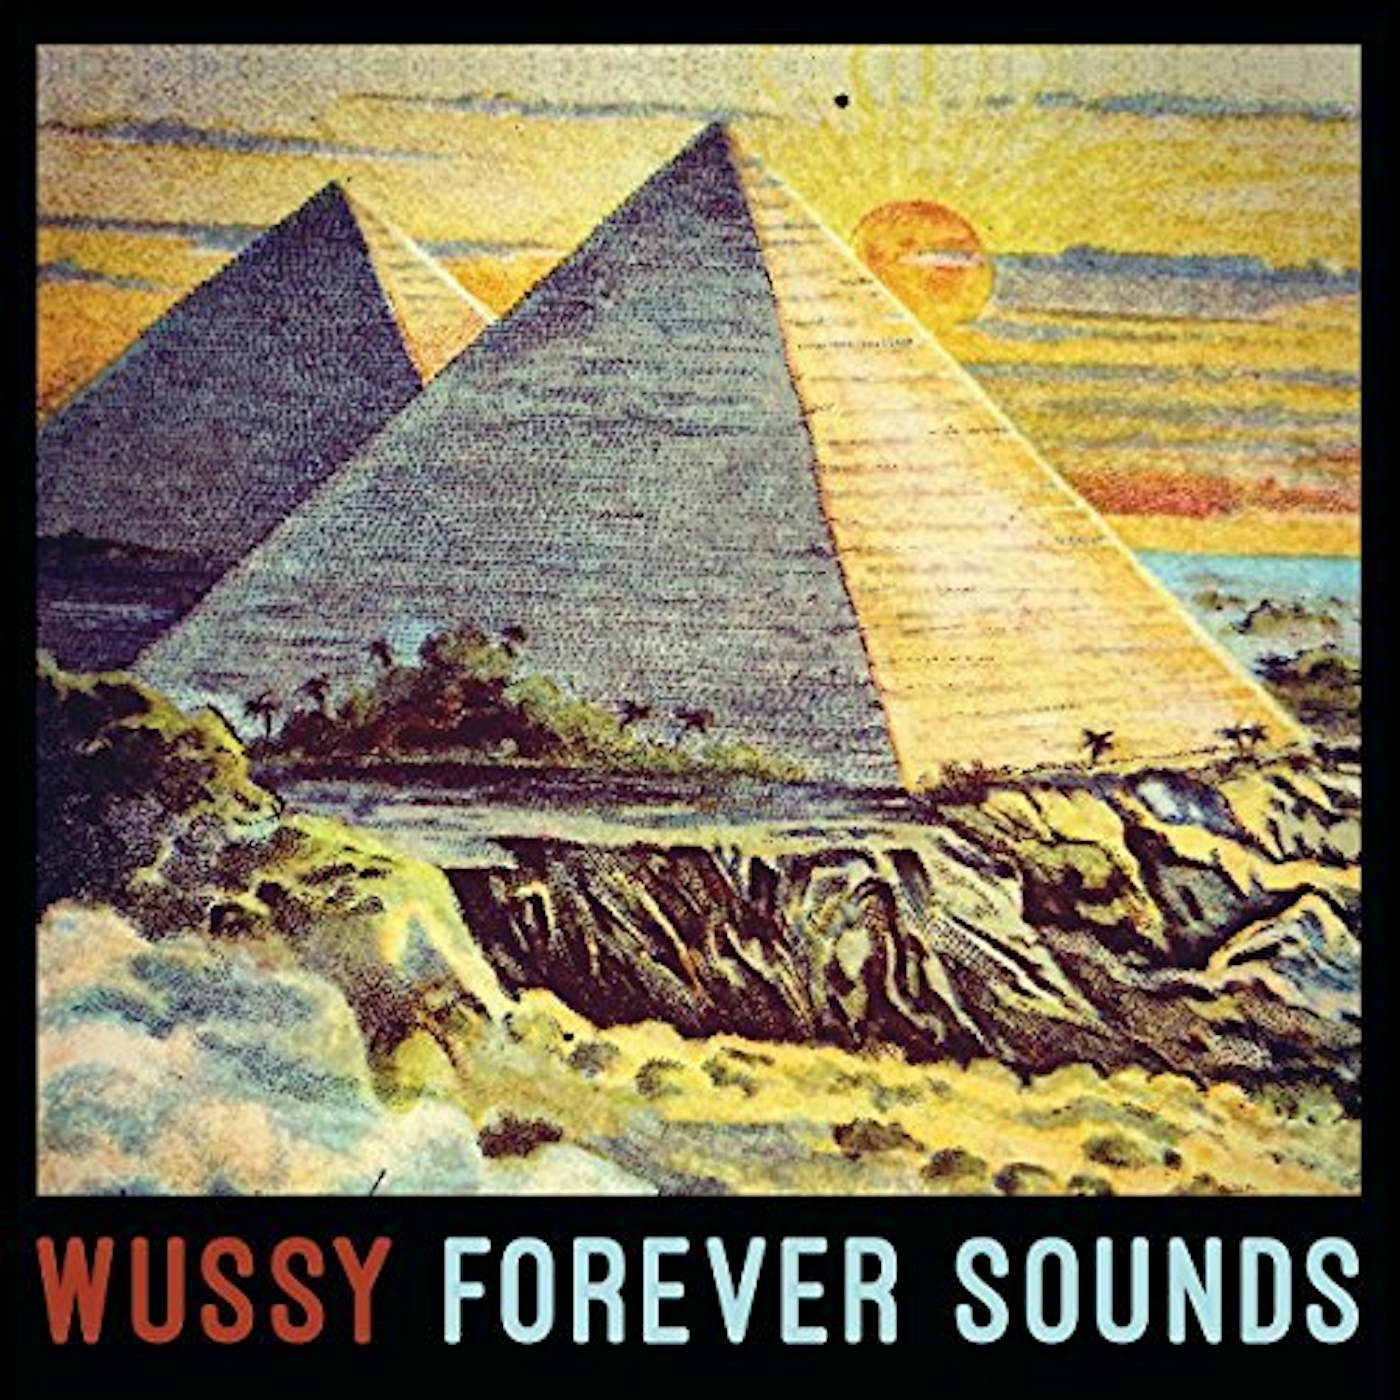 Wussy Forever Sounds Vinyl Record